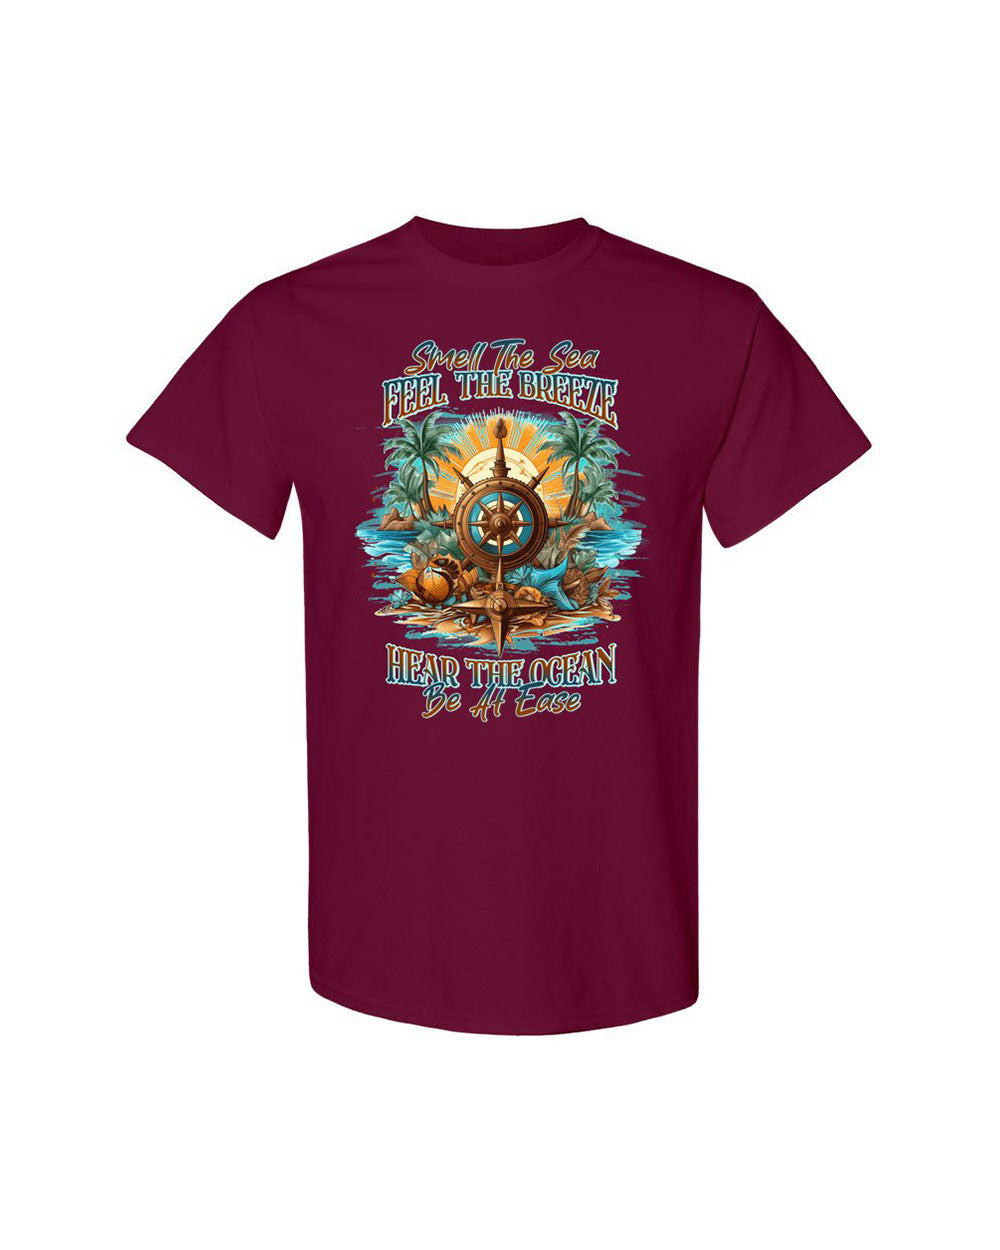 SMELL THE SEA FEEL THE BREEZE COTTON SHIRT - YHLN0906238